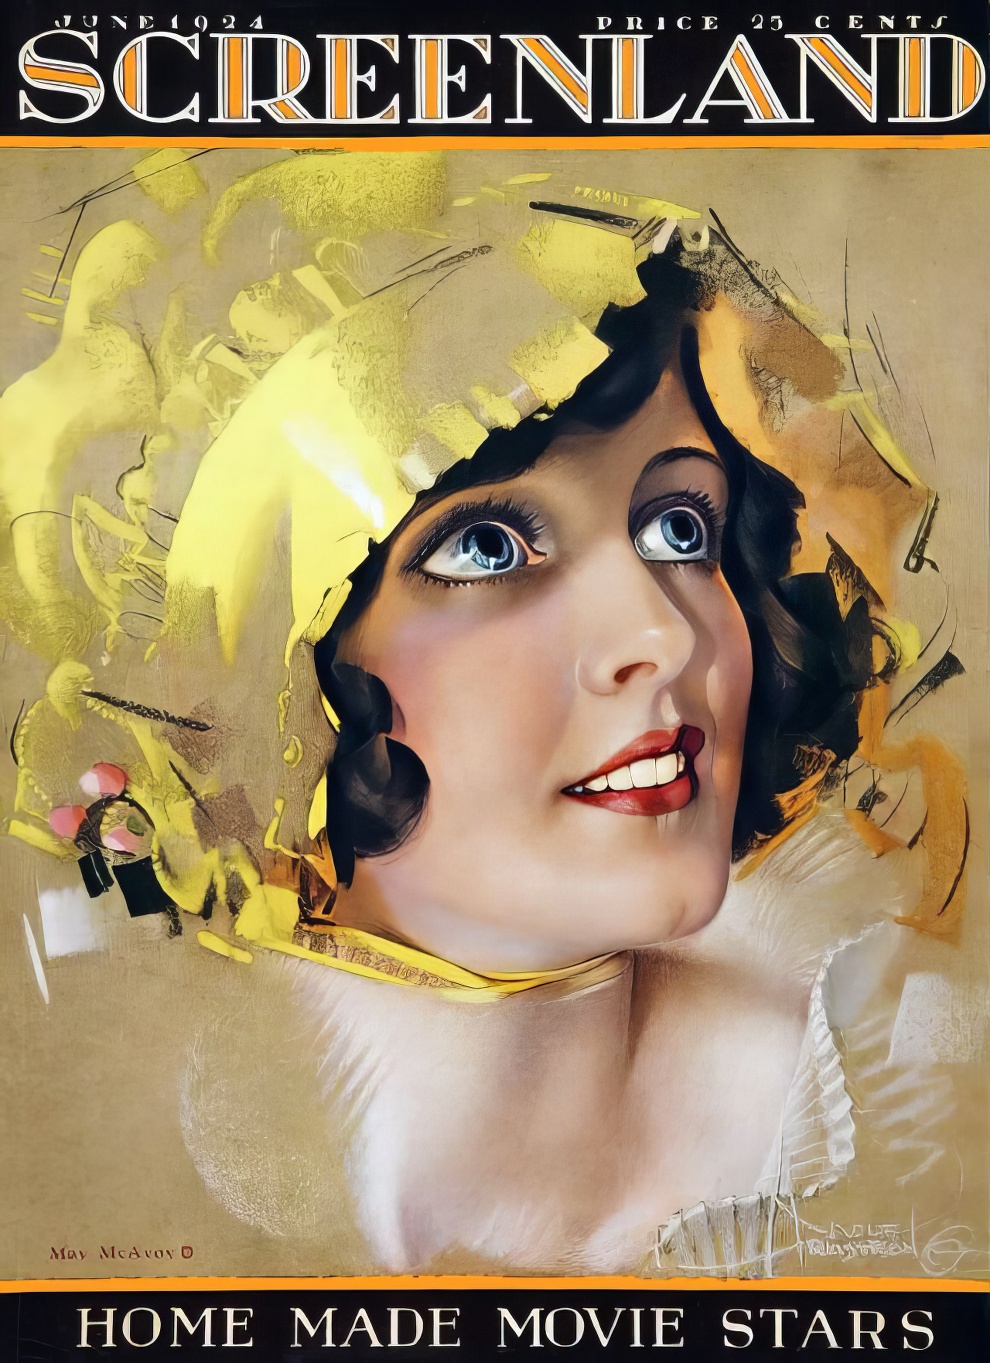 Rolf Armstrong 17 